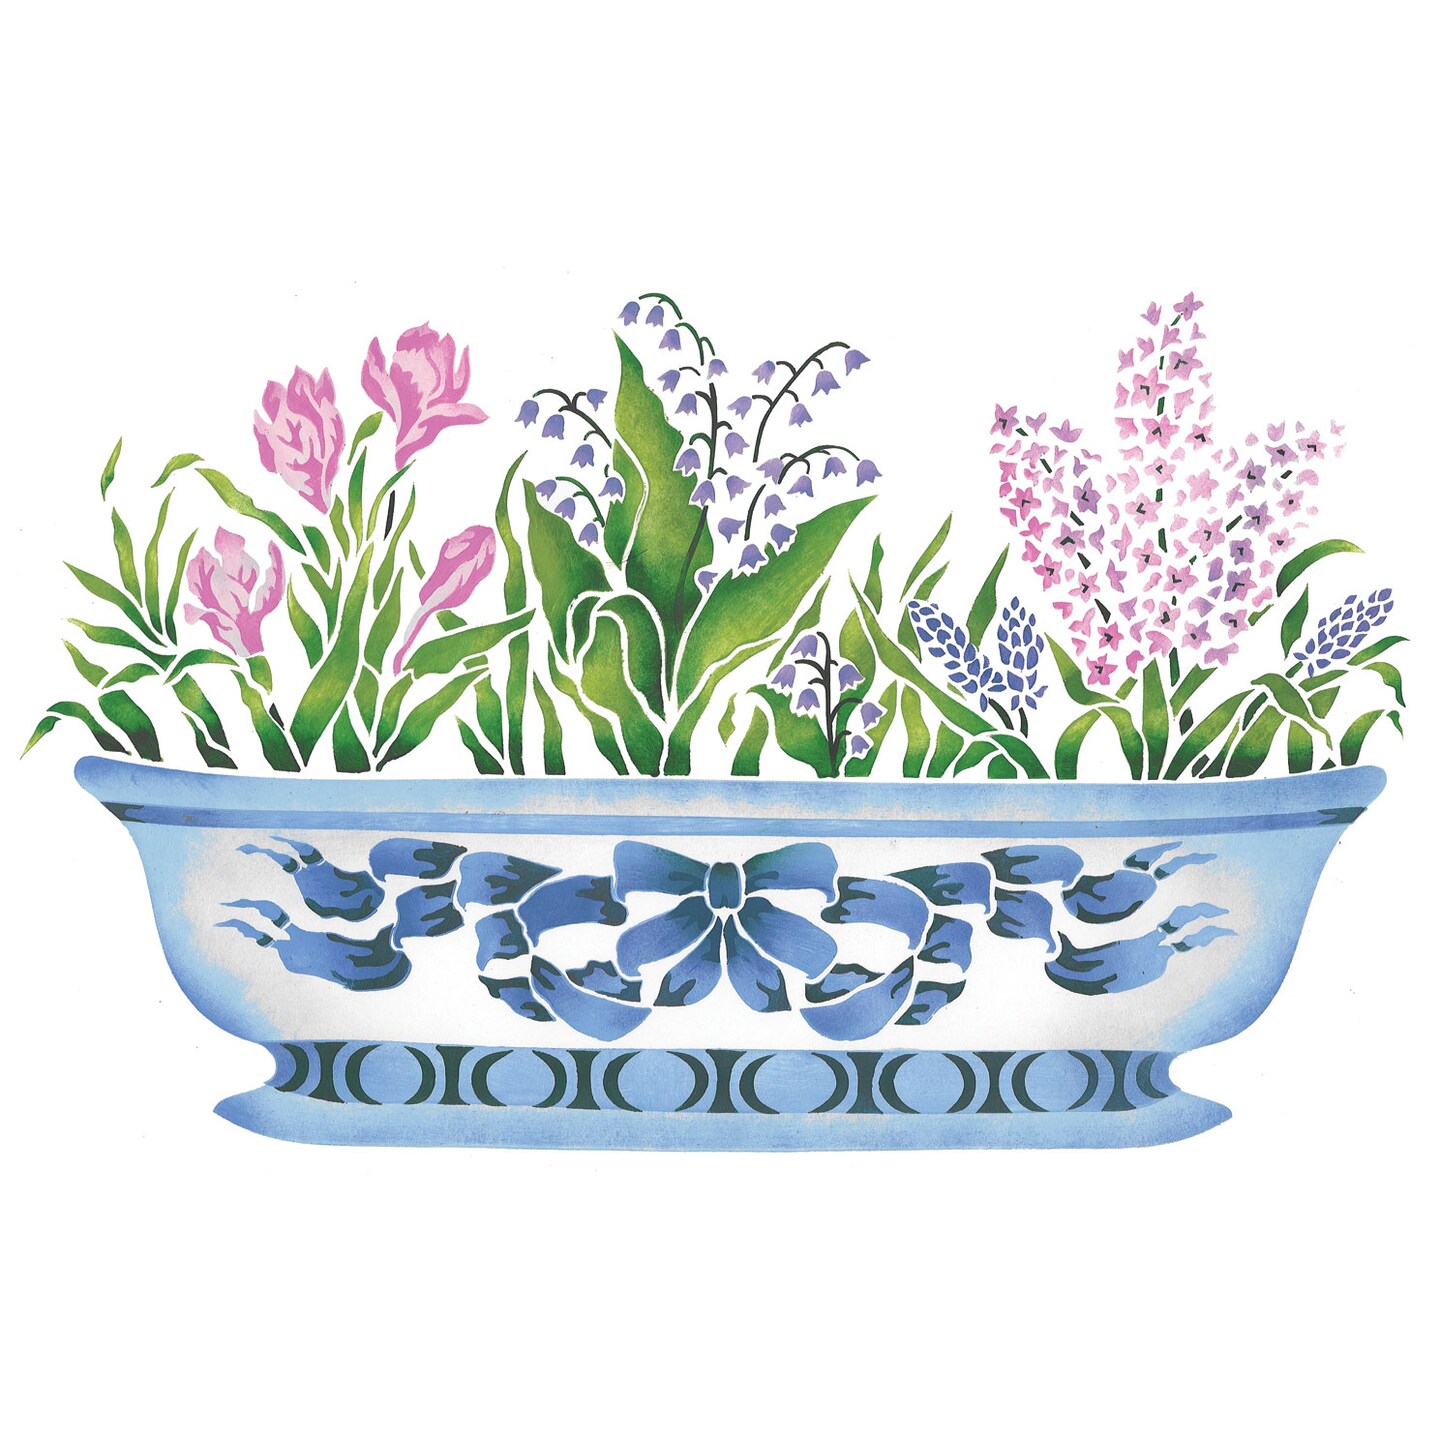 Small Spring Bulbs in Porcelain Bowl Wall Stencil | 2562 by Designer Stencils | Floral Stencils | Reusable Art Craft Stencils for Painting on Walls, Canvas, Wood | Reusable Plastic Paint Stencil for Home Makeover | Easy to Use &#x26; Clean Art Stencil